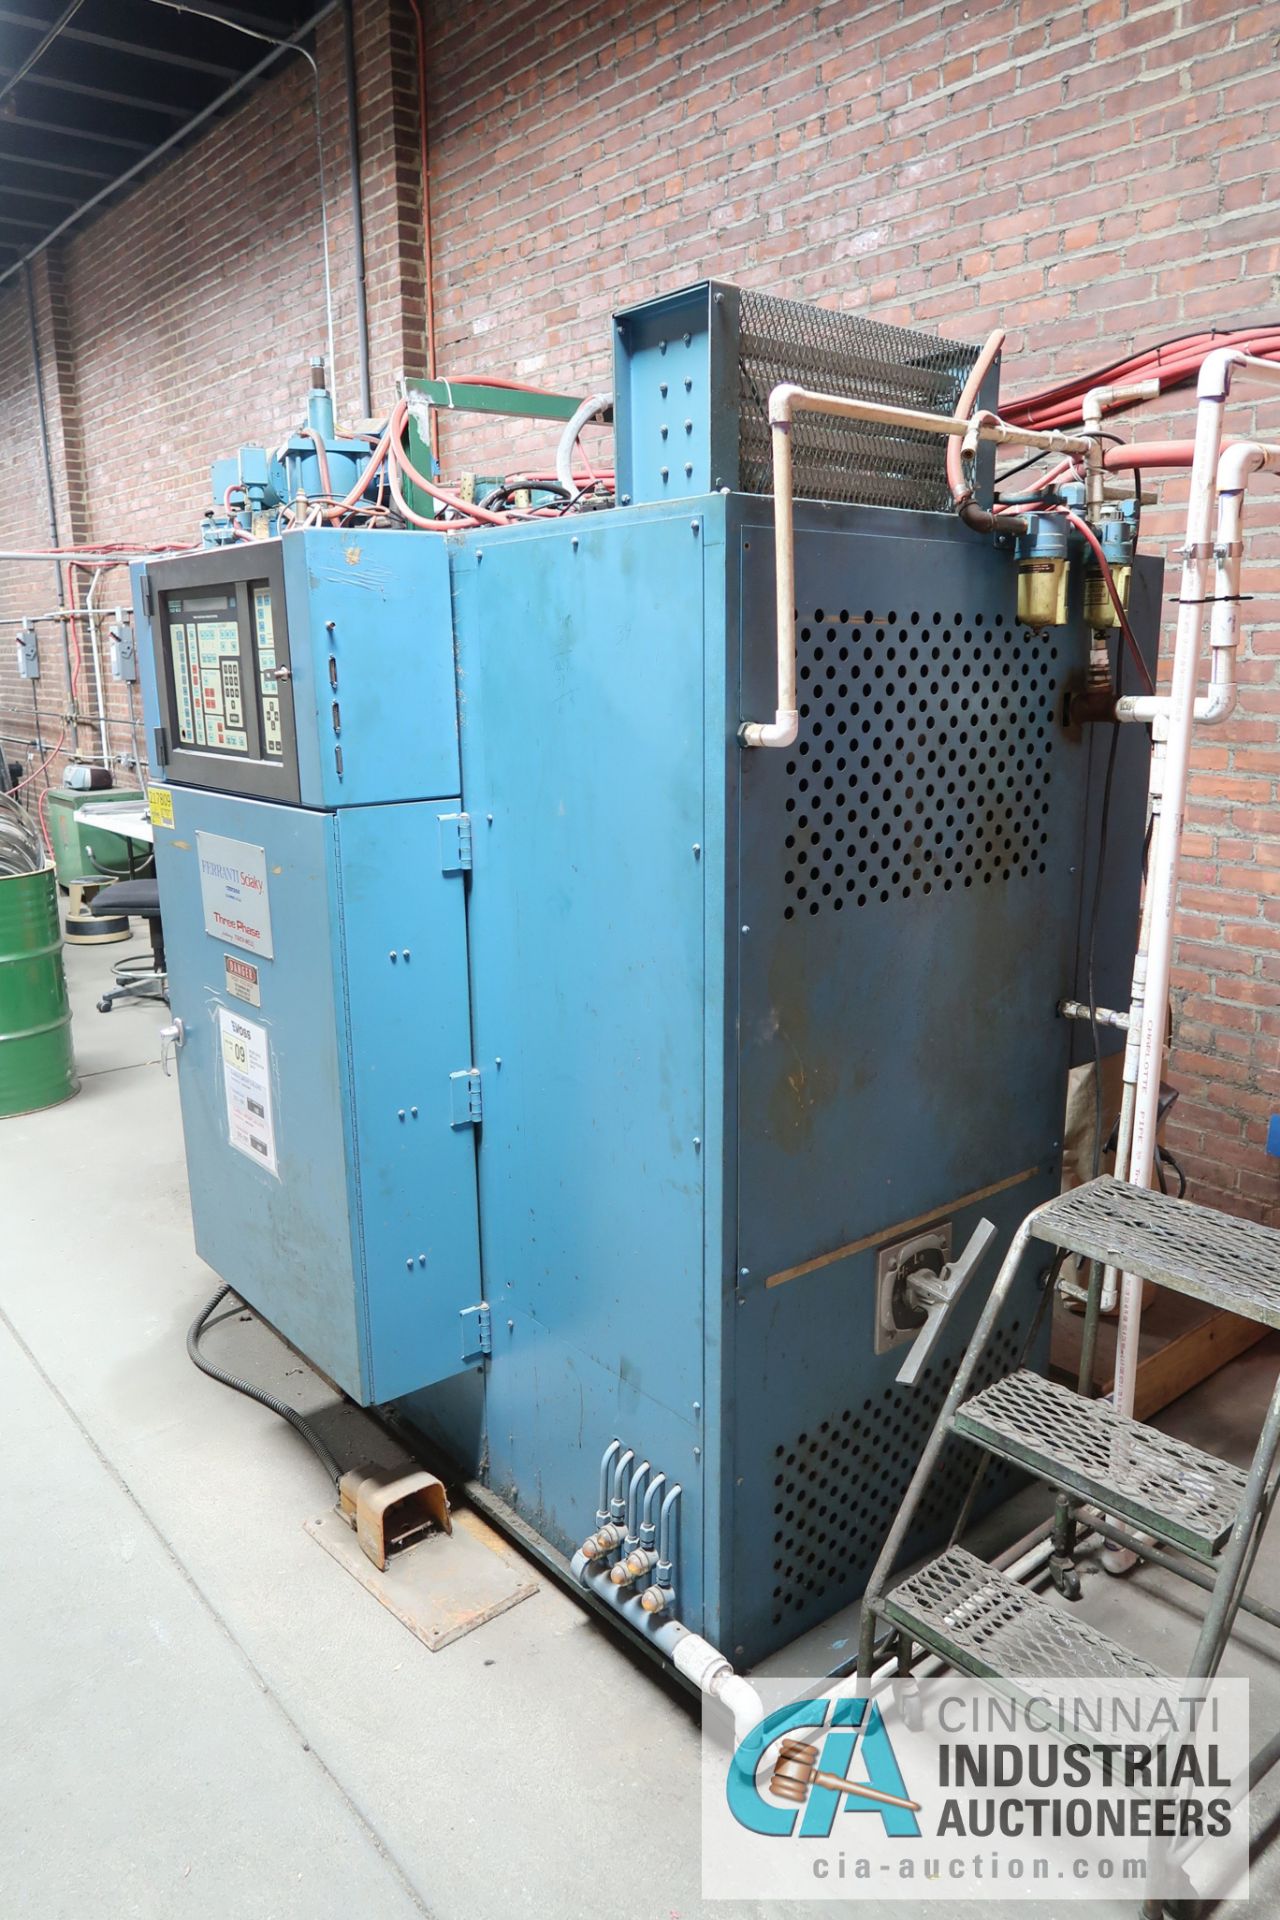 75 KVA FERRANTI-SCIAKY TYPE PMMITCMP SEAM WELDER; S/N 11487, 460 VOLTS, 60 HERTZ, SCIAKY TOUCH- - Image 8 of 12